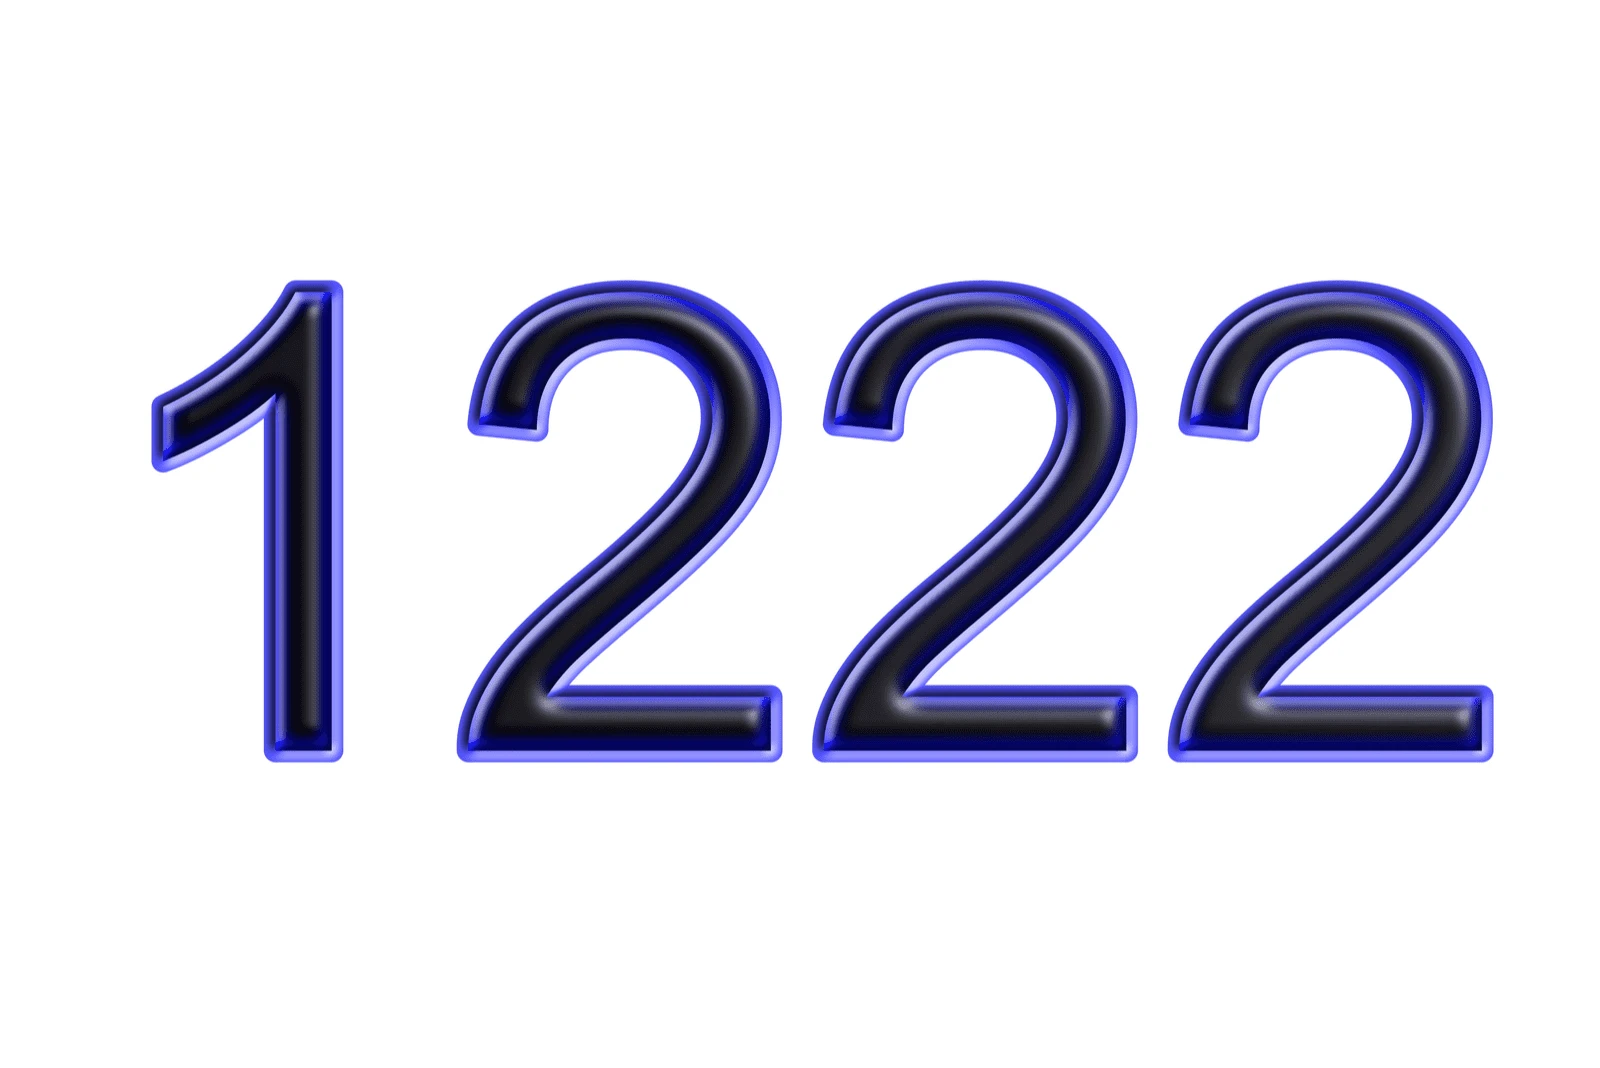 number 1222 on a white background